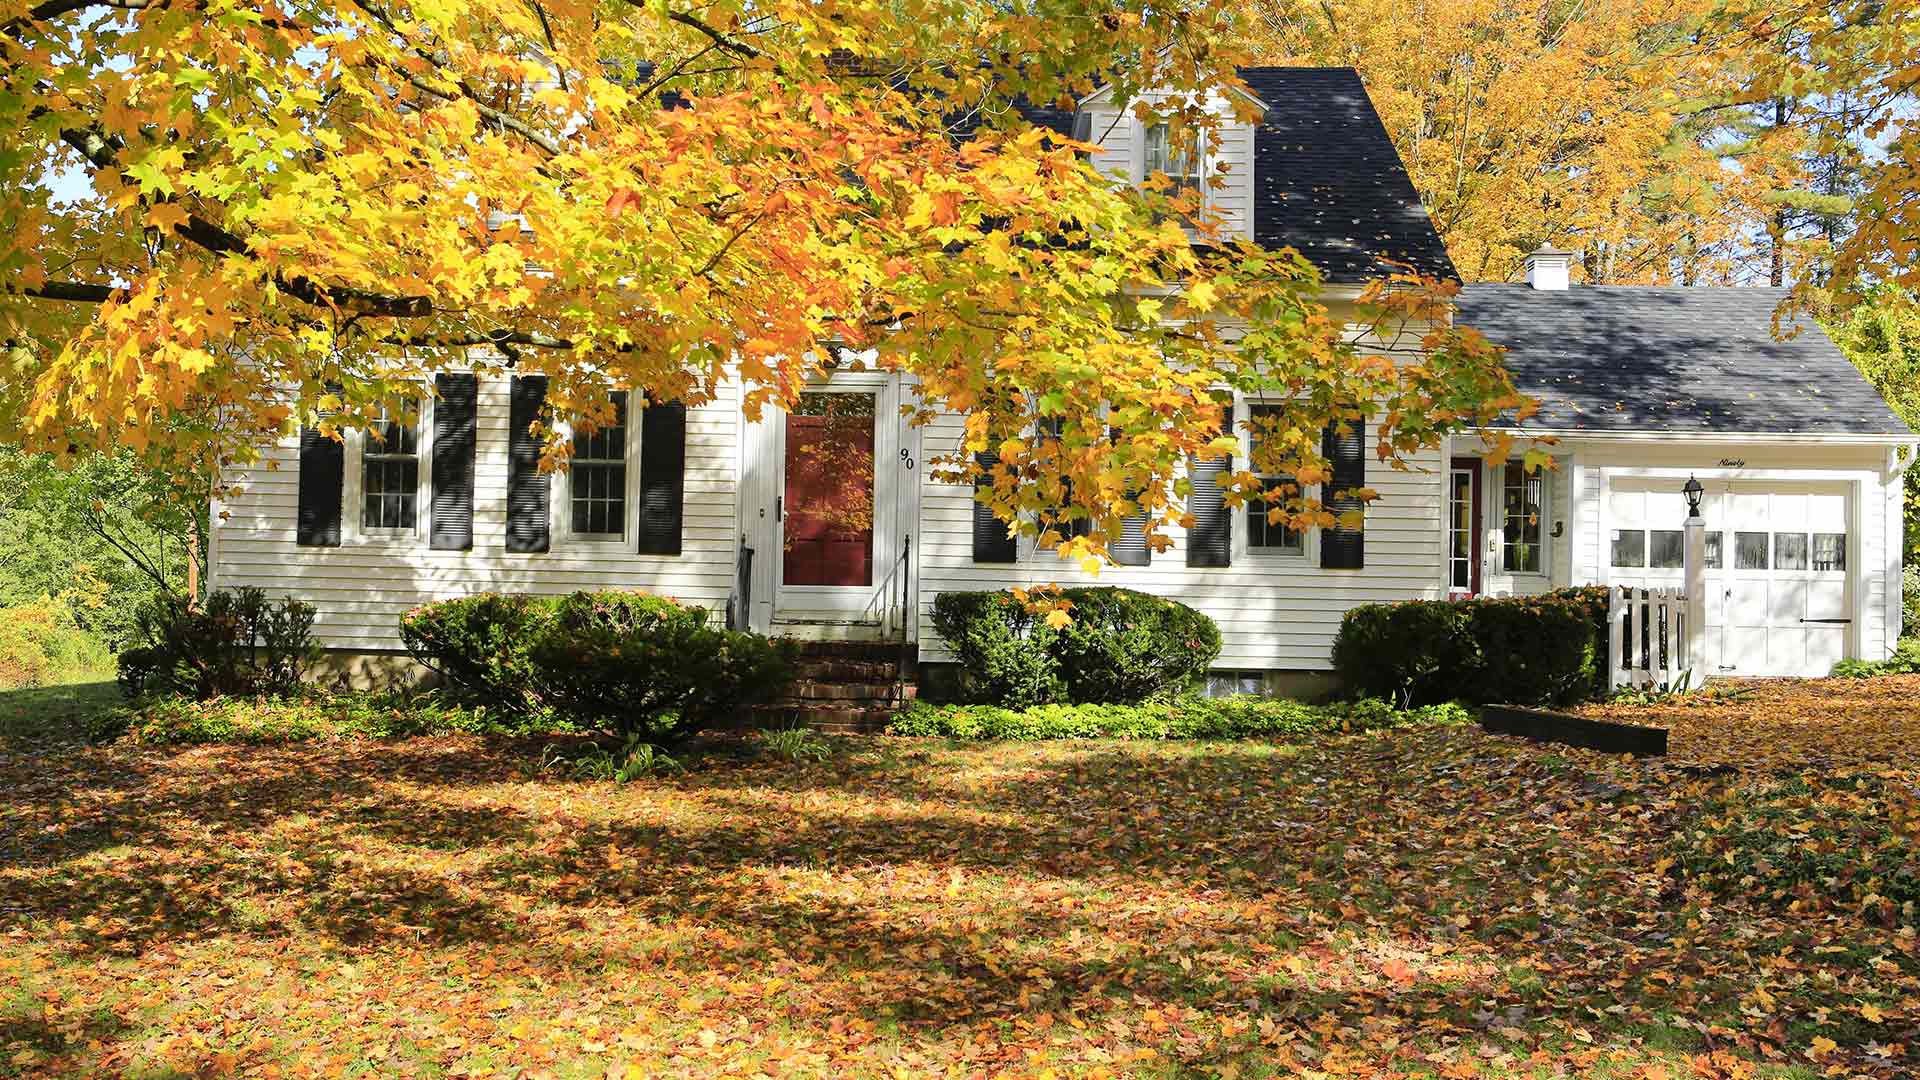 Thinking of Turning a Blind Eye to the Leaves on Your Lawn? Read This